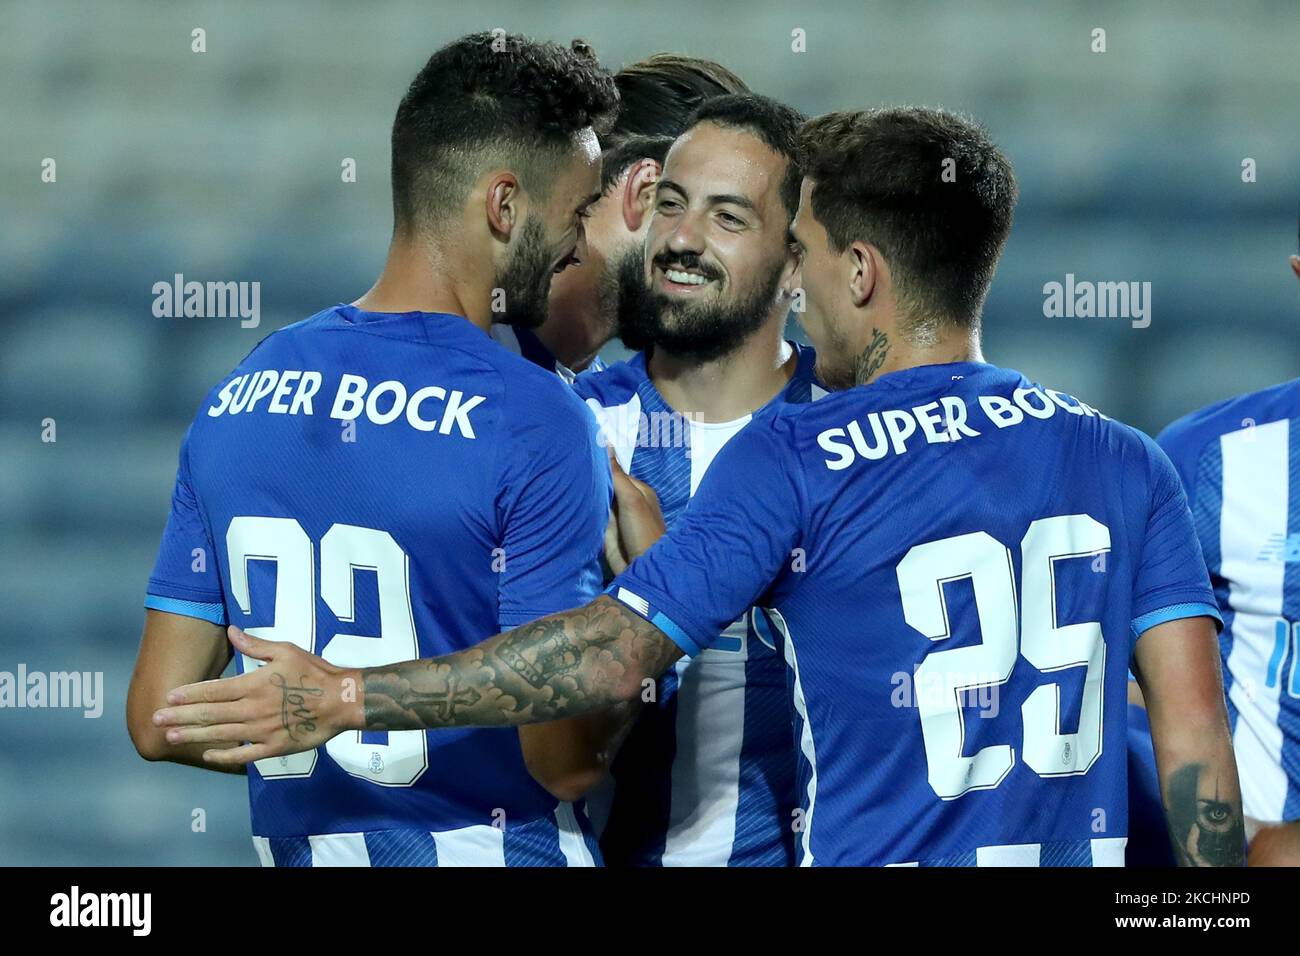 Bruno Costa of FC Porto (C ) celebrates with teammates after scoring during the pre-season friendly football match between FC Porto and Lille OSC at the Algarve stadium in Loule, Portugal on July 25, 2021. (Photo by Pedro FiÃºza/NurPhoto) Stock Photo